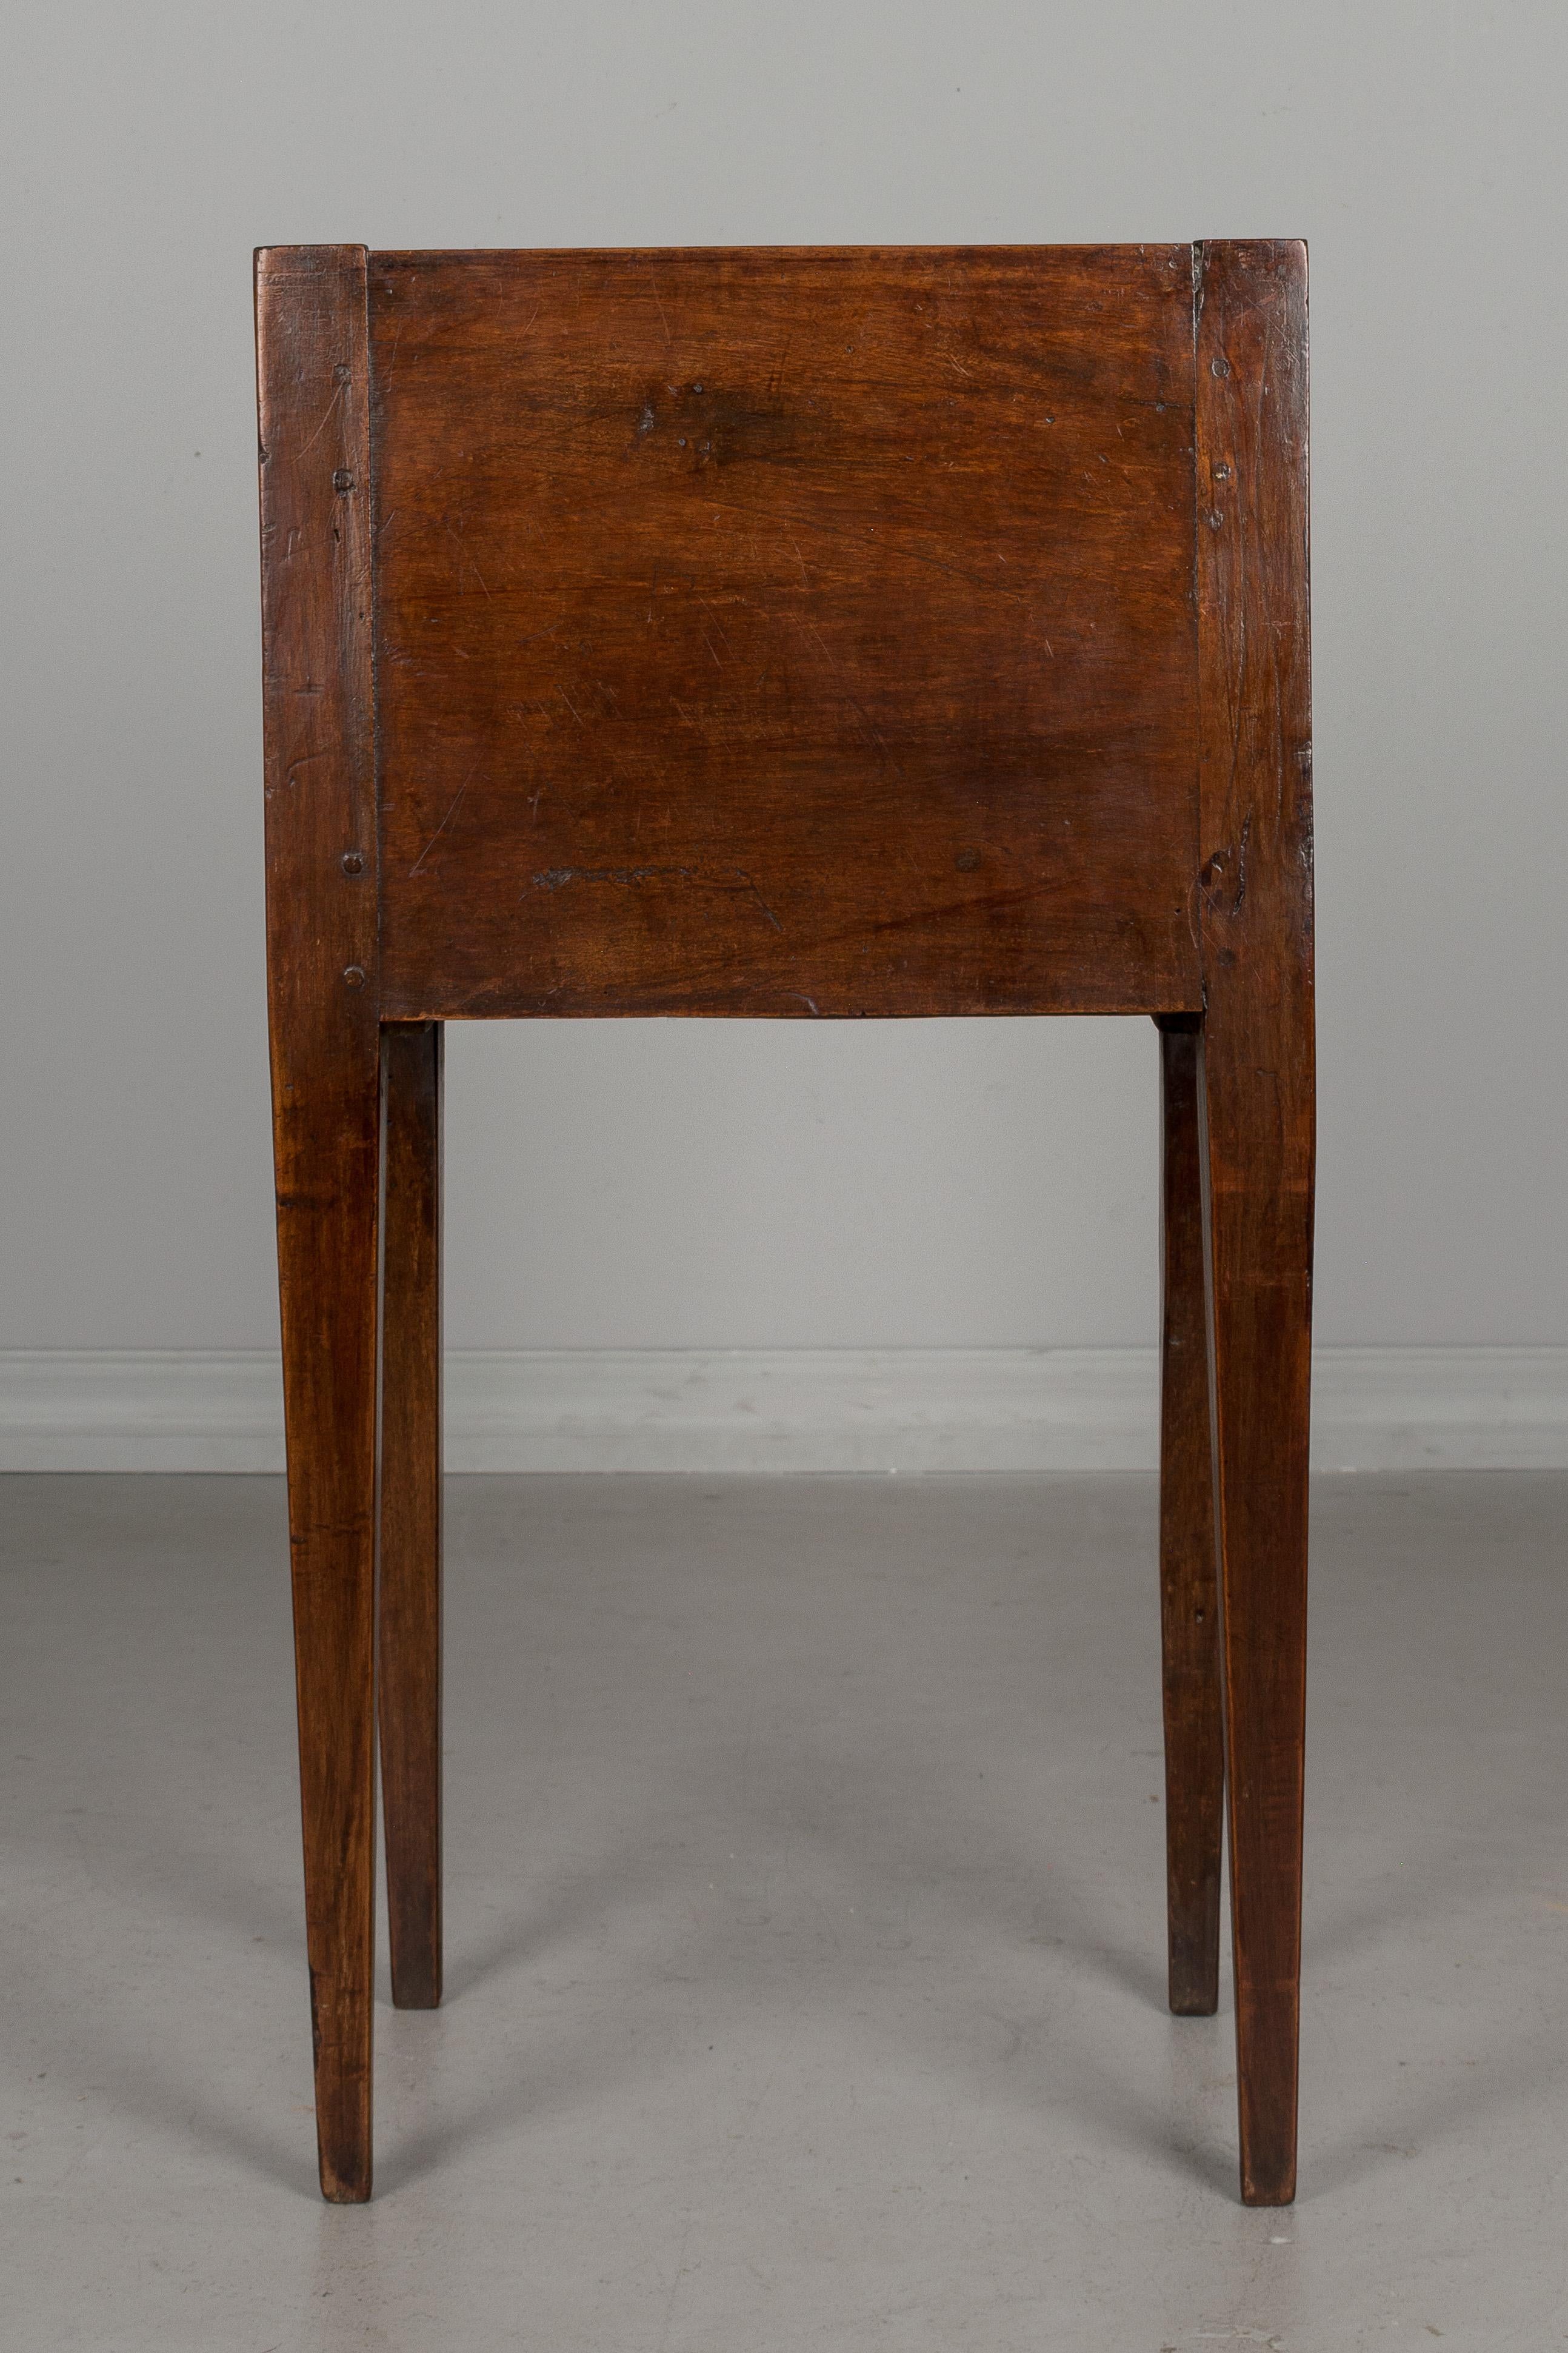 Hand-Crafted 19th Century Louis XVI Style Side Table